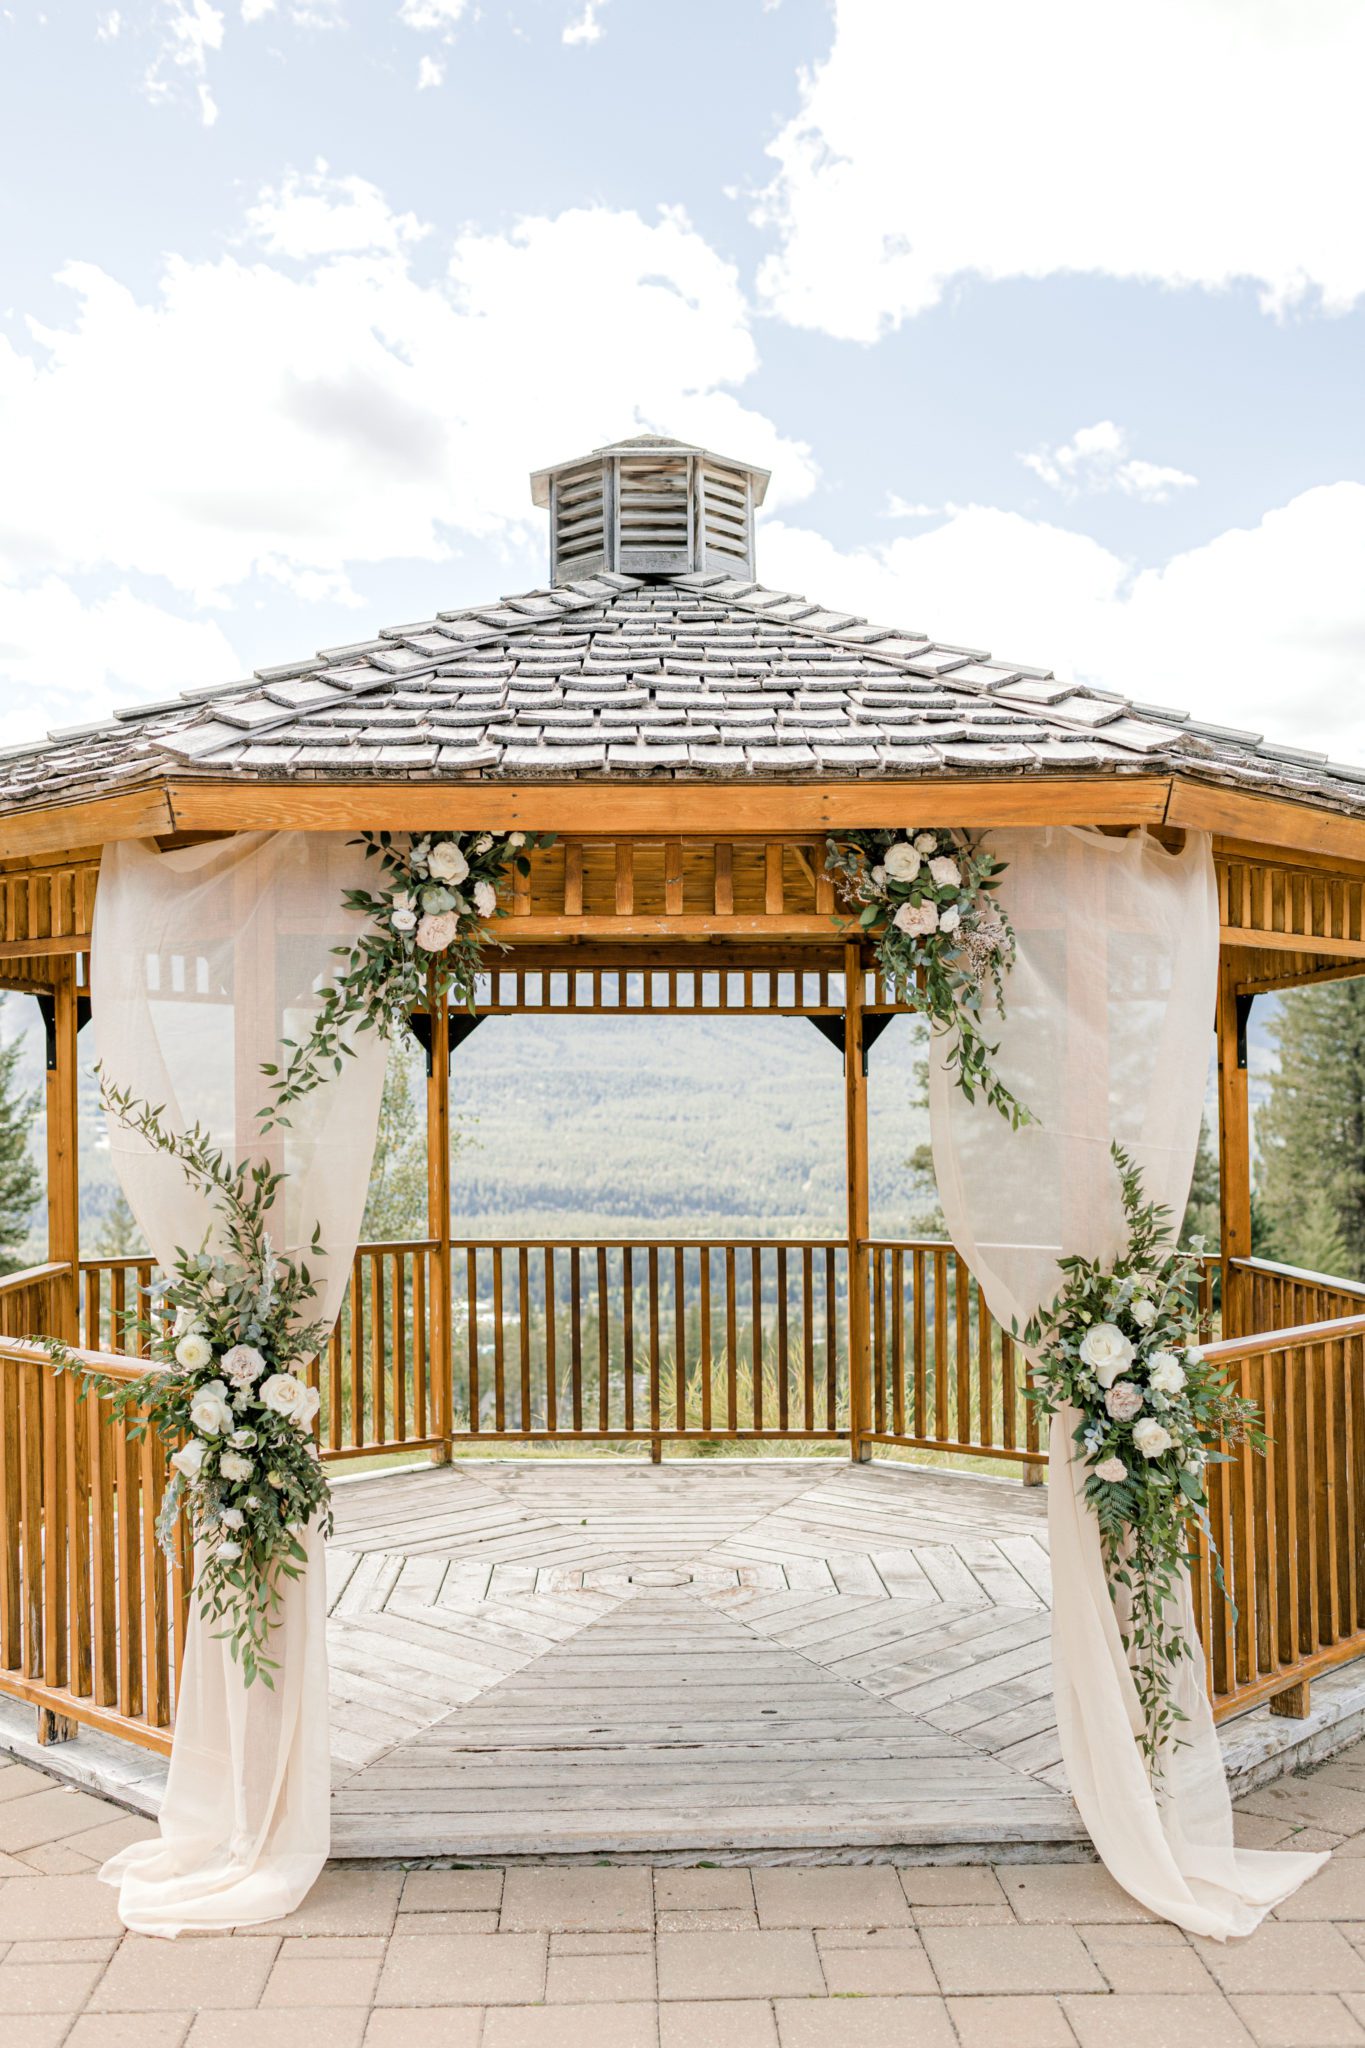 Outdoor wedding gazebo in Canmore, Alberta at Silvertip Resort. Blush and green florals on blush drapery, classic wedding ceremony inspiration. 